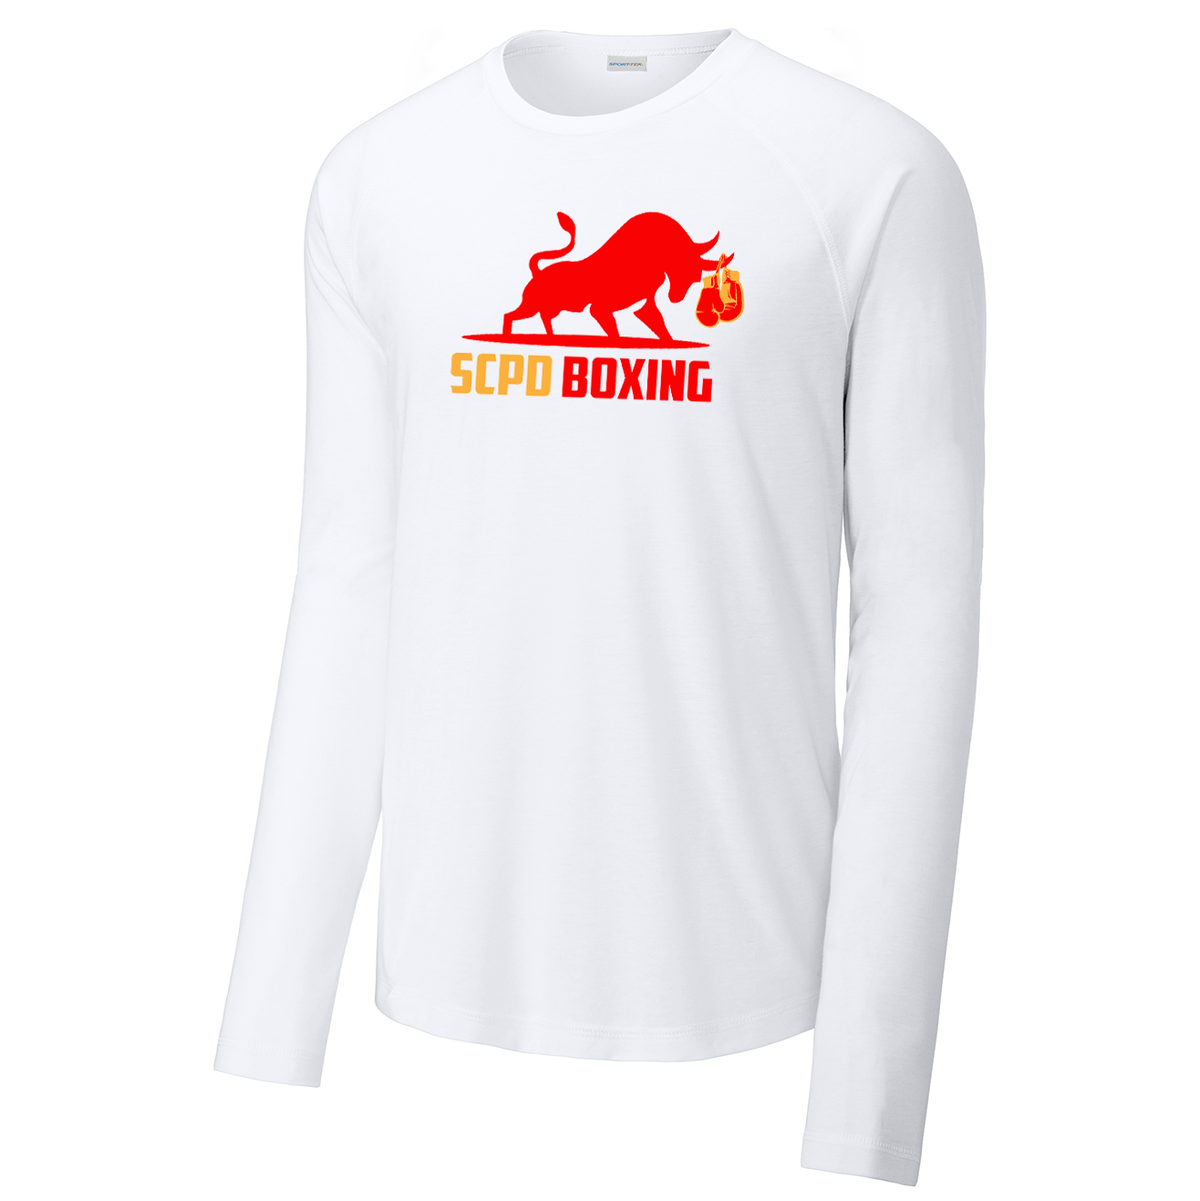 SCPD Boxing Long Sleeve Raglan CottonTouch